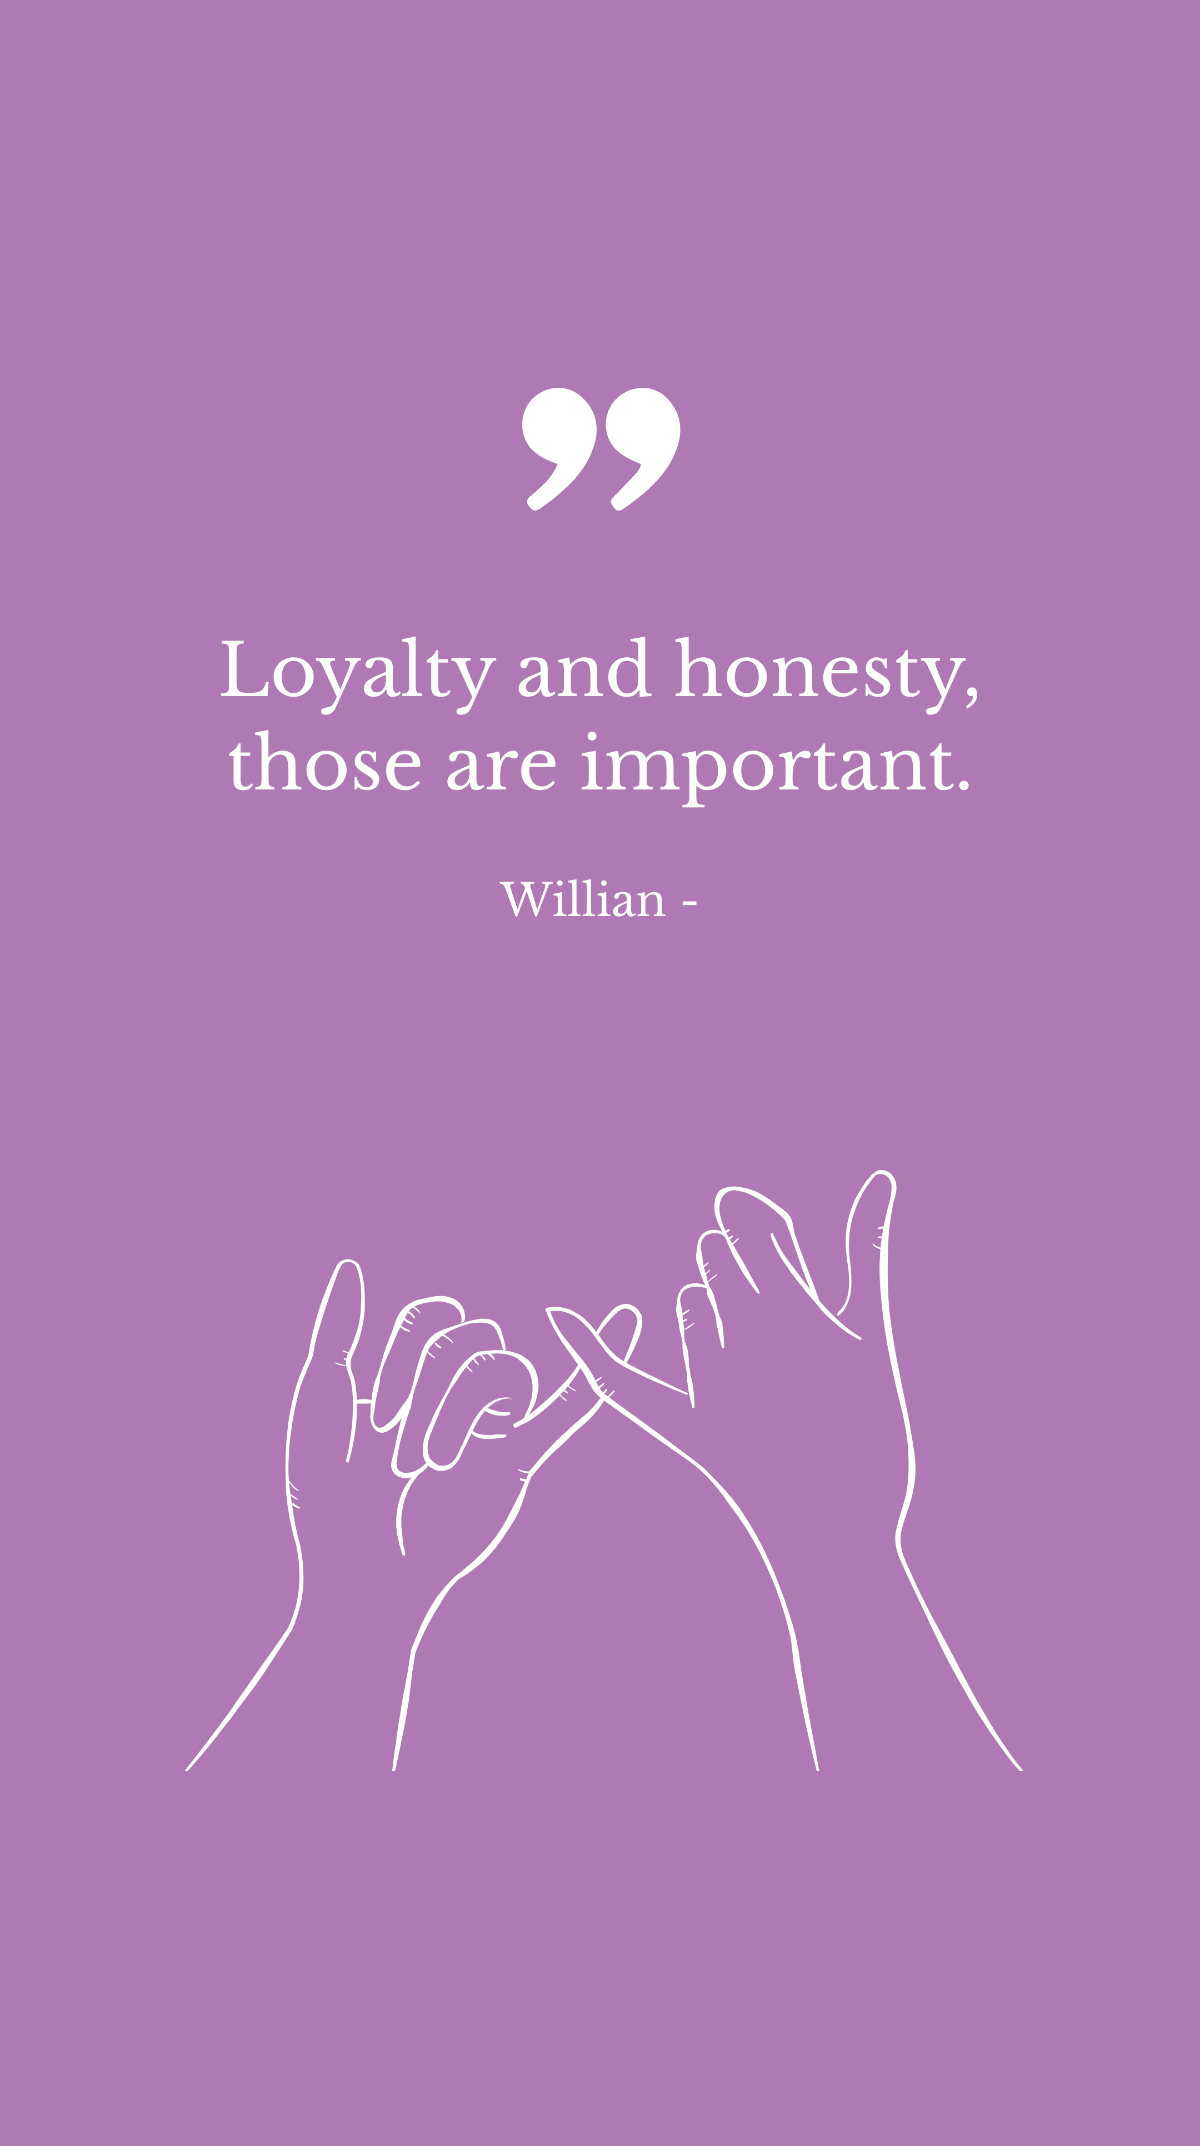 Free Willian - Loyalty and honesty, those are important. Template